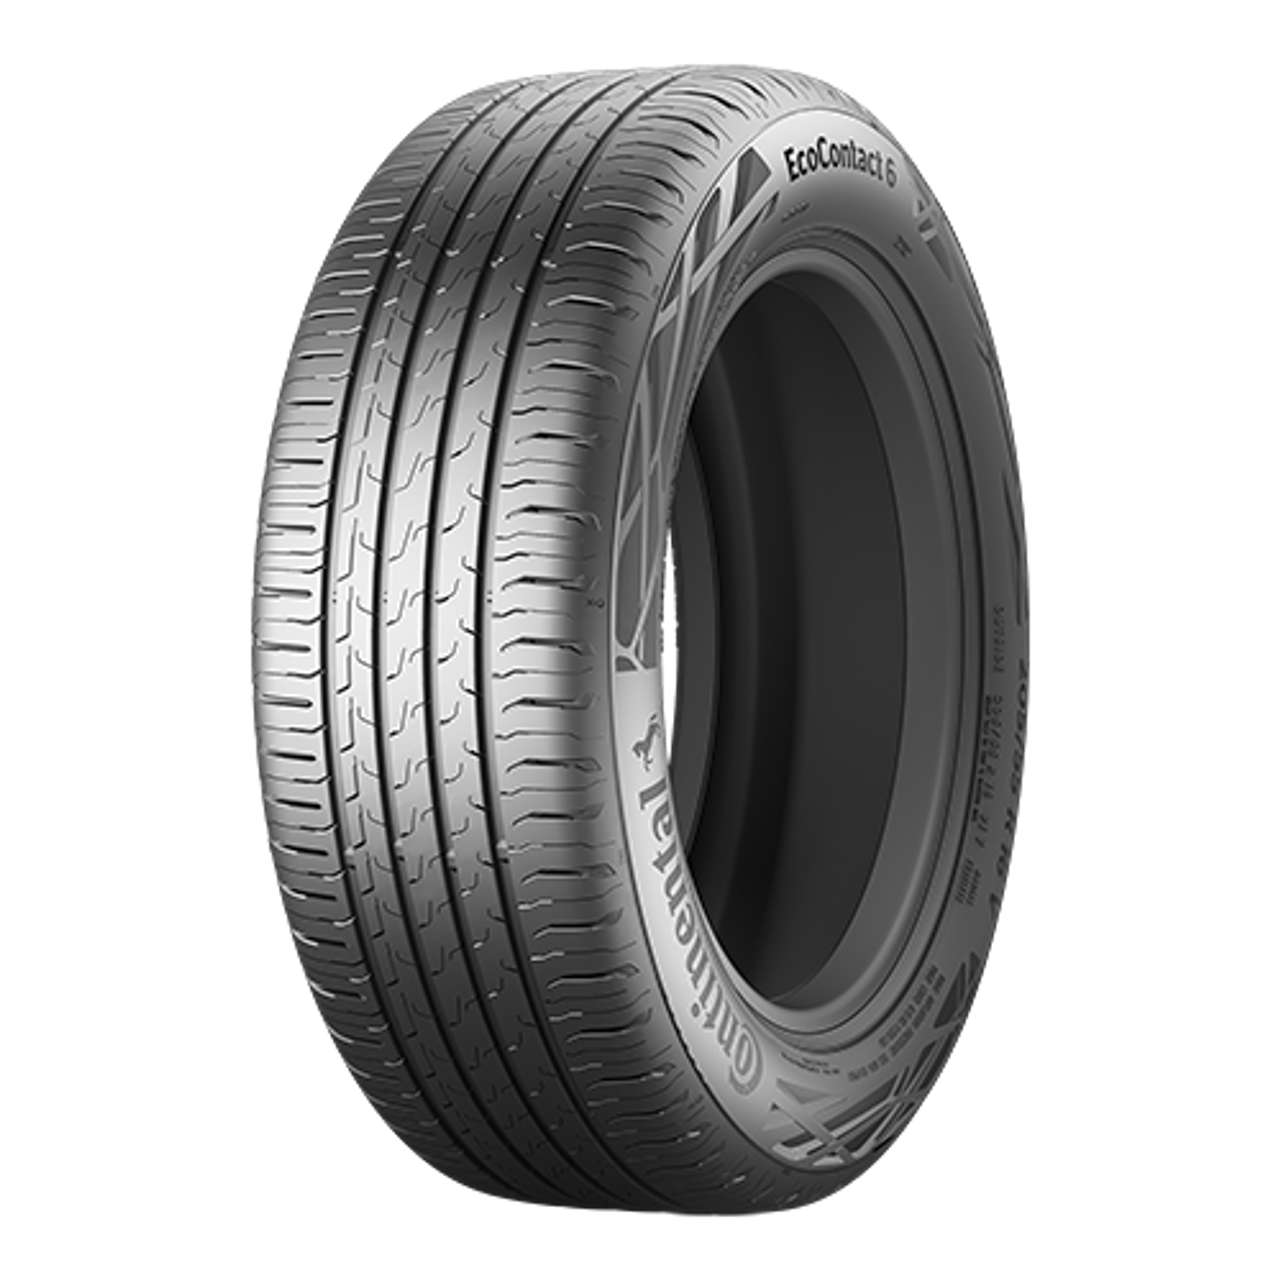 CONTINENTAL ECOCONTACT 6 145/65R15 72T 